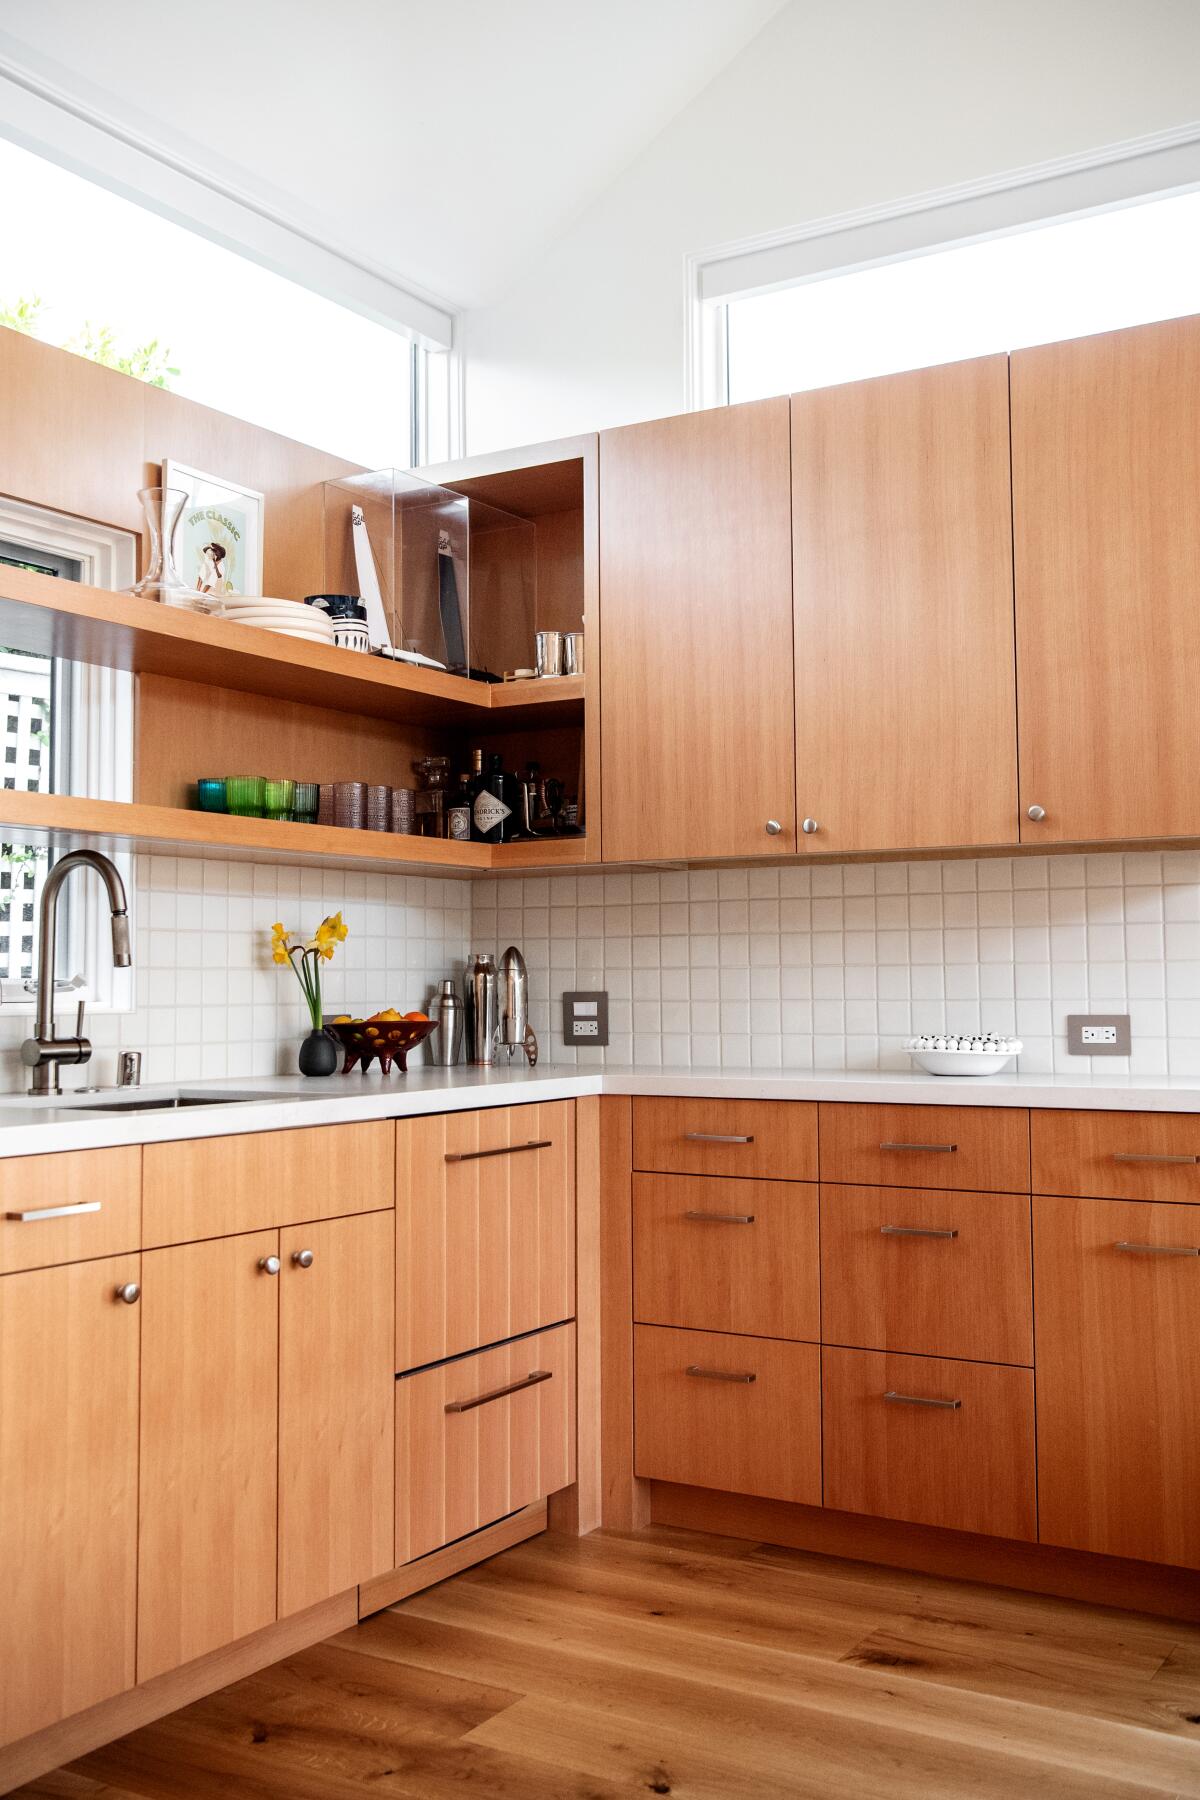 Open shelving mixes with wood cabinetry on the top level of storage for this kitchen.